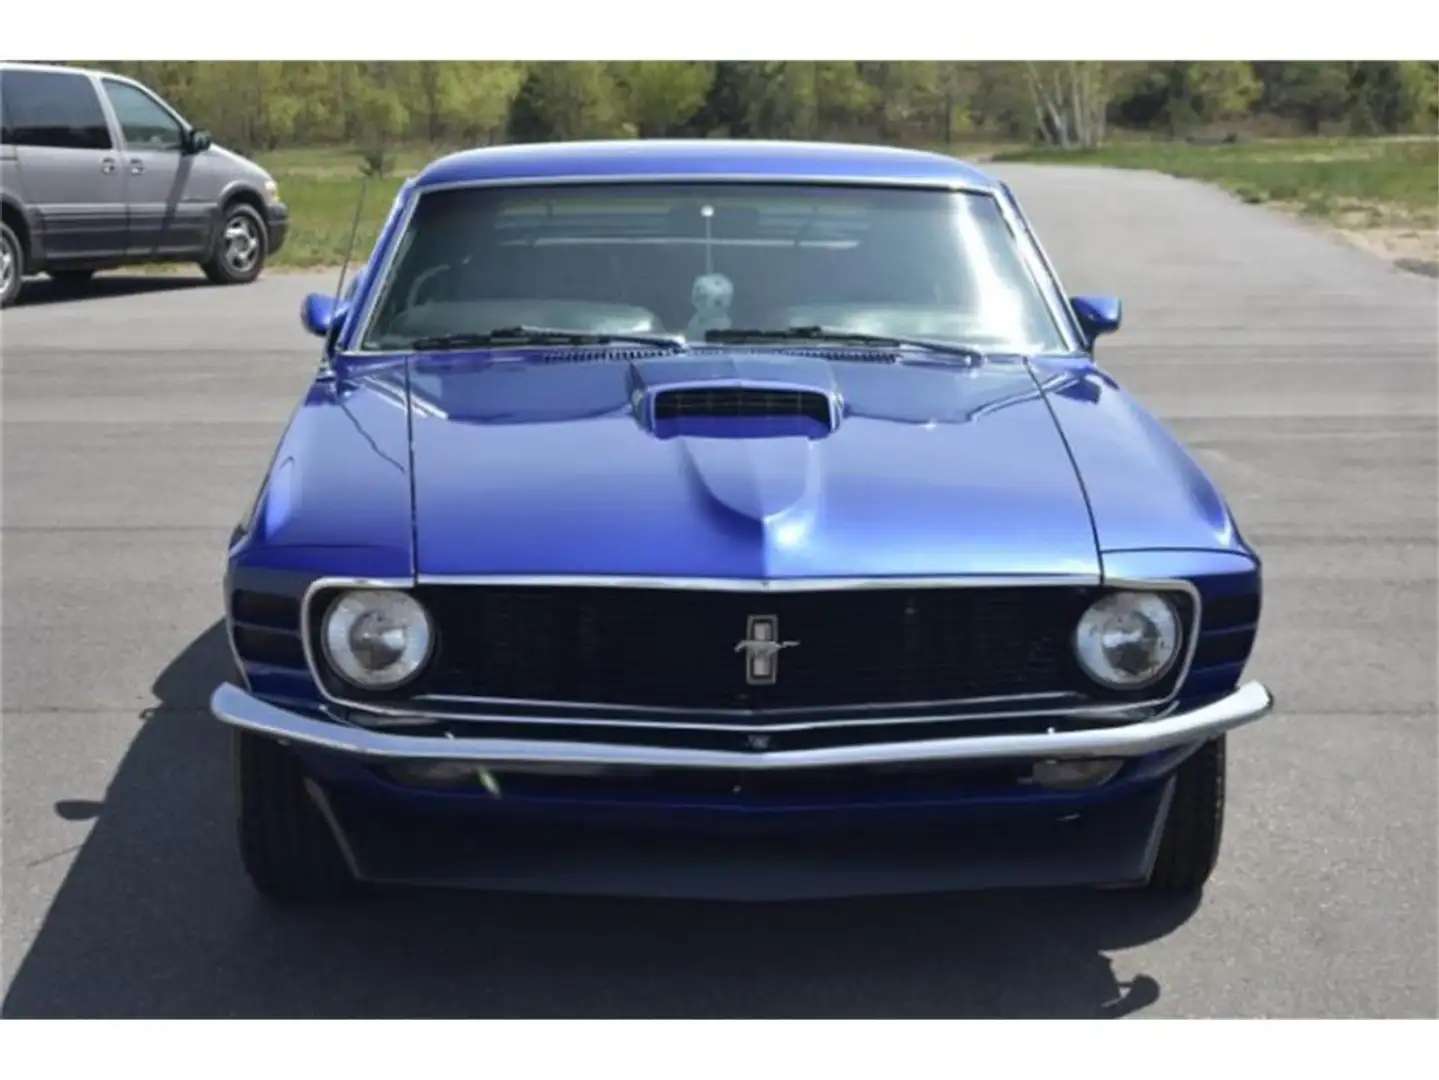 Ford Mustang FASTBACK 1970 dossier complet au 0651552080 - 1